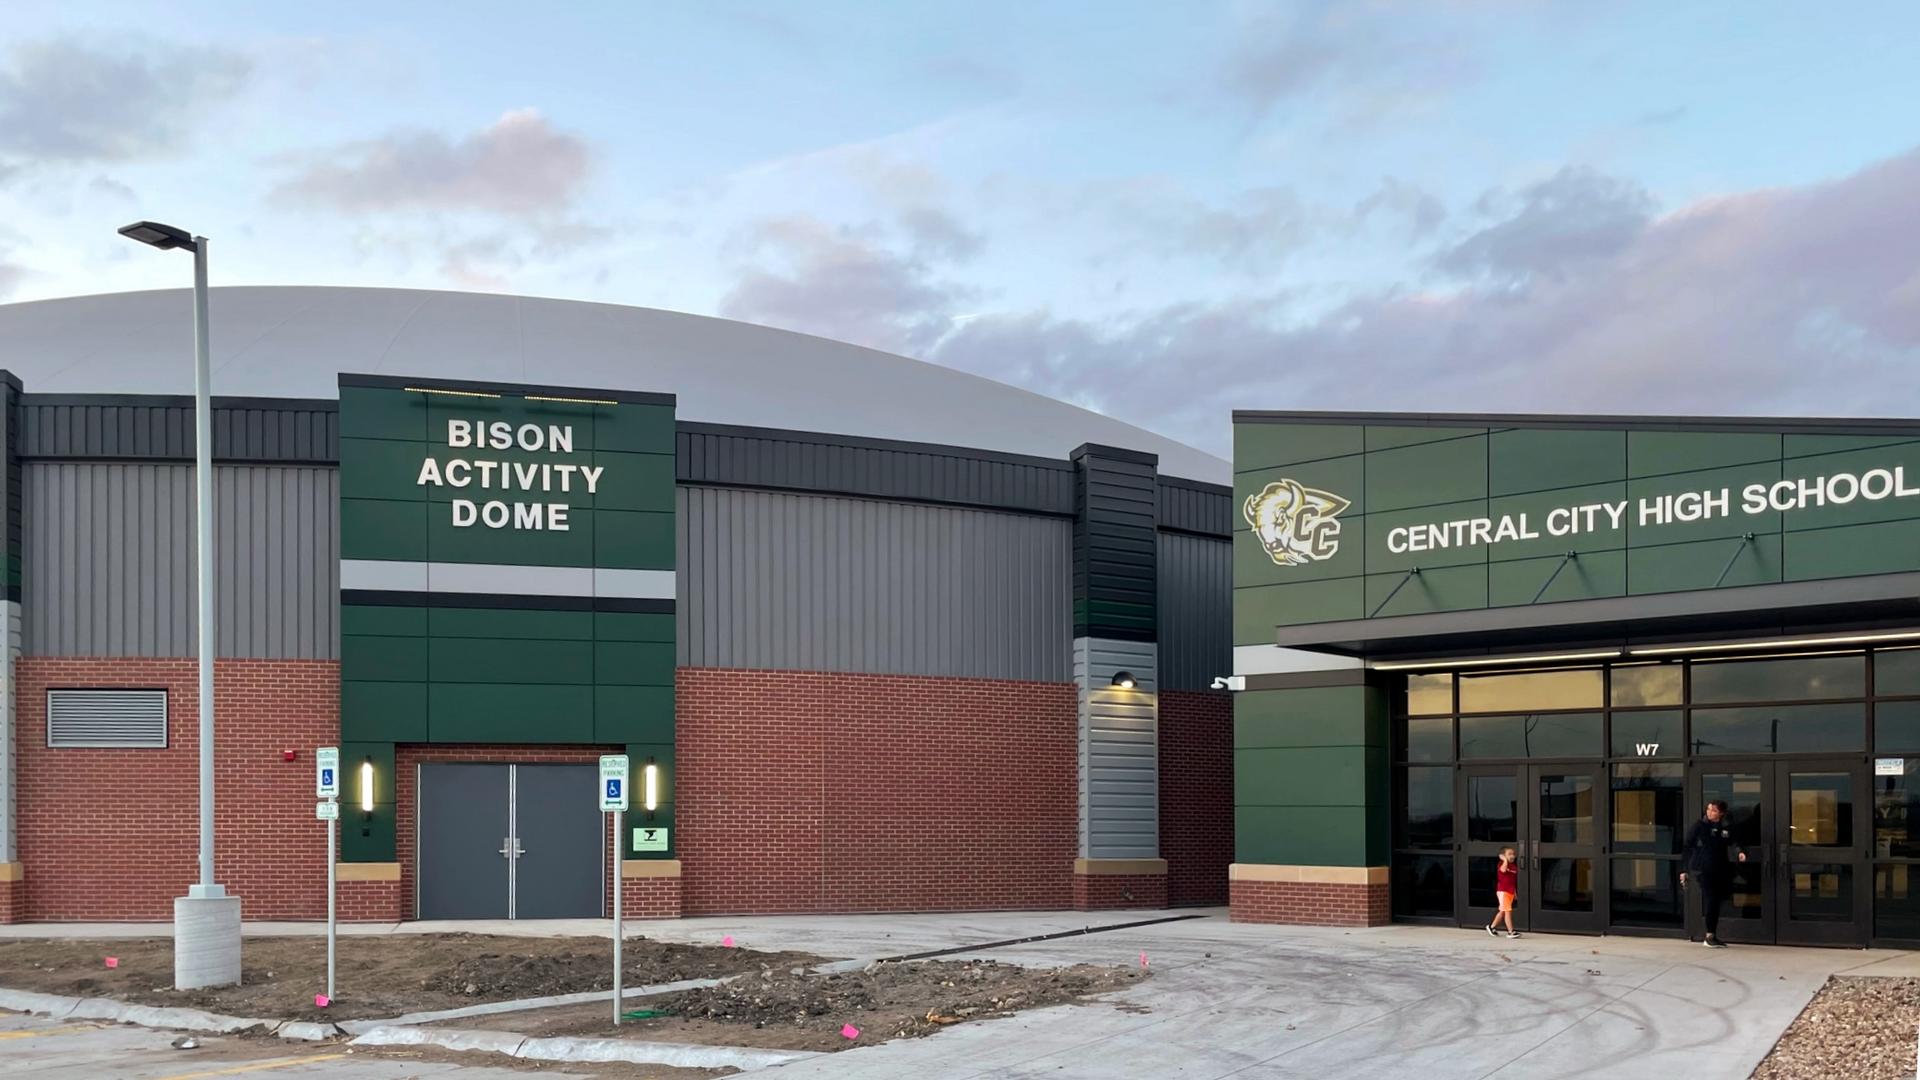 Main entrance to the Bison Activity Dome